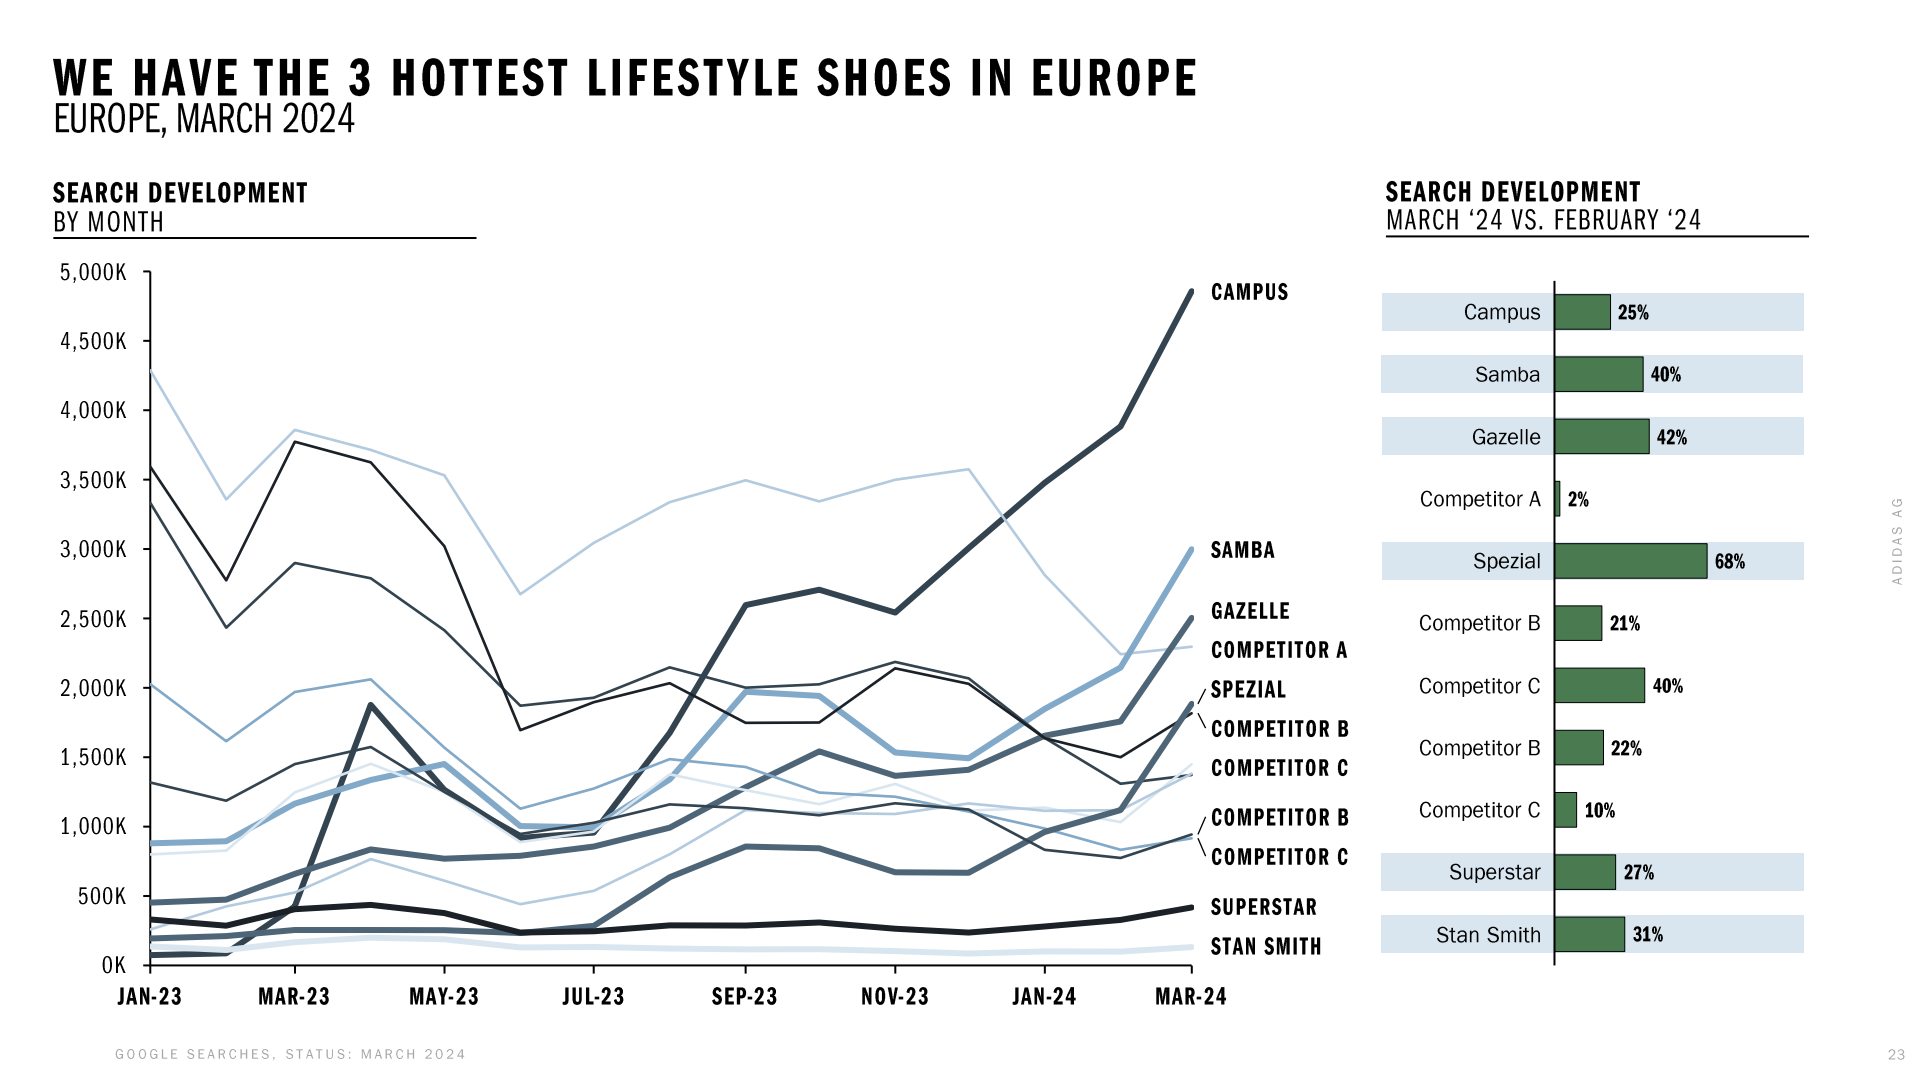 Graph showing the top 3 trending lifestyle shoes in Europe for March 2024 with relative search growth percentages